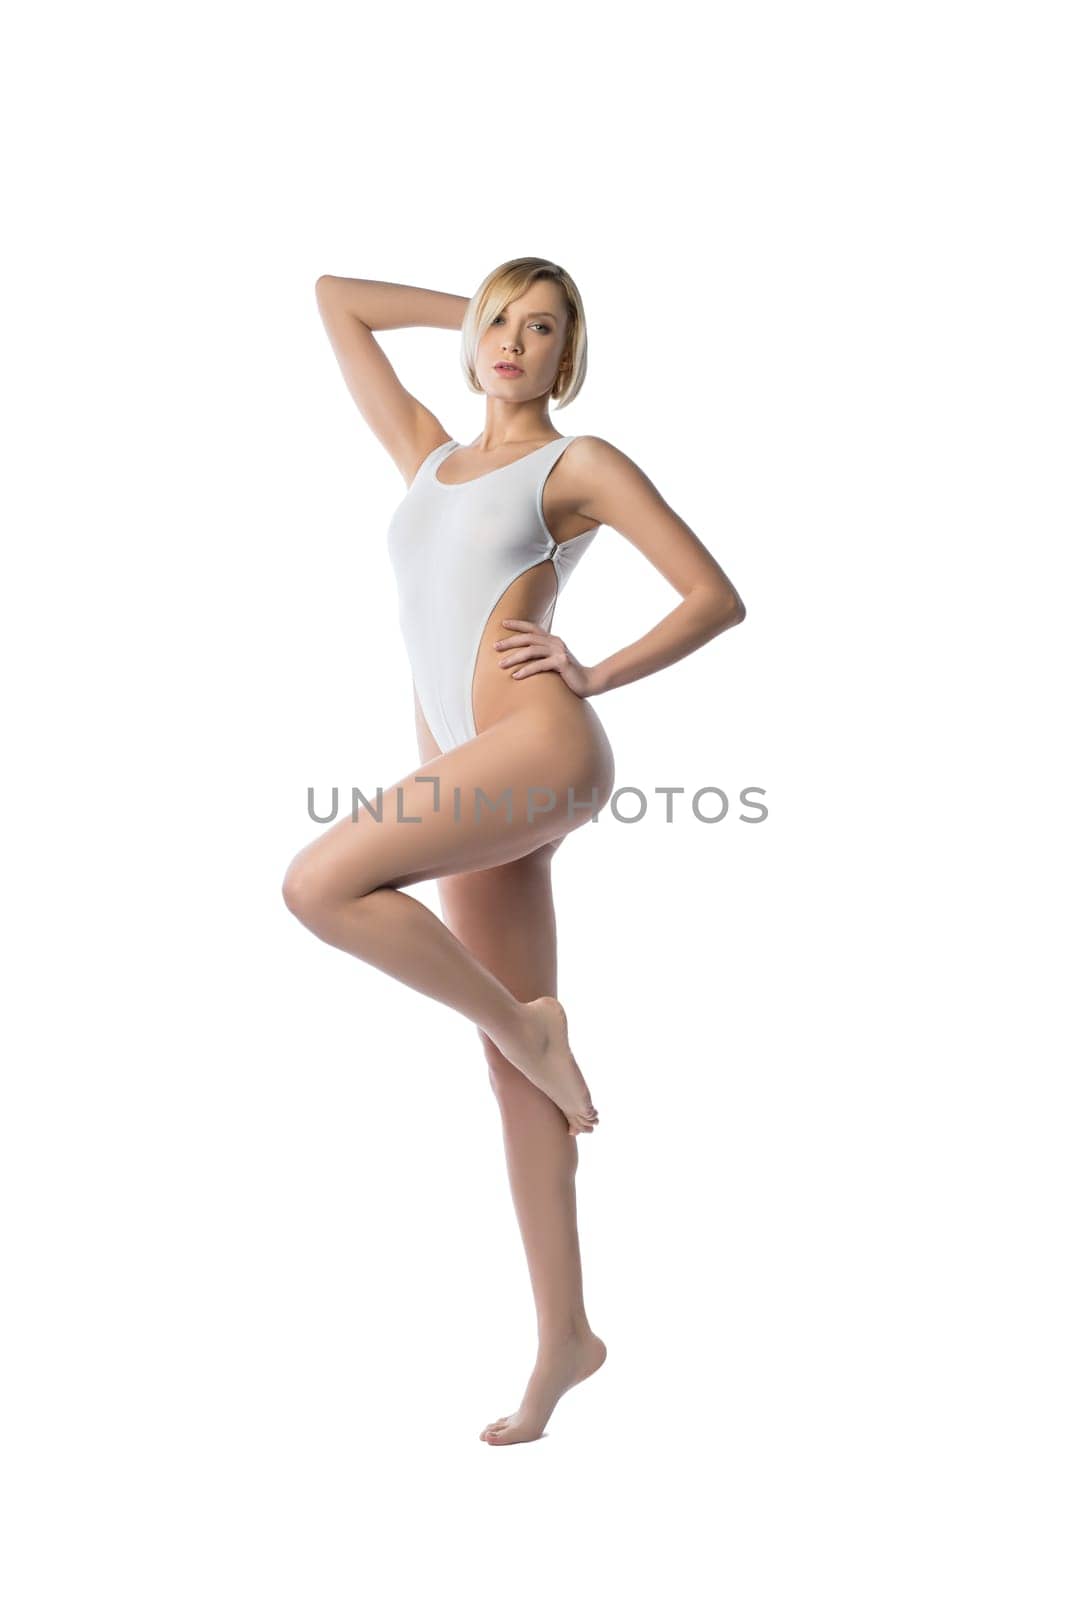 Model with bob haircut advertises sexy bodysuit. Isolated on white background